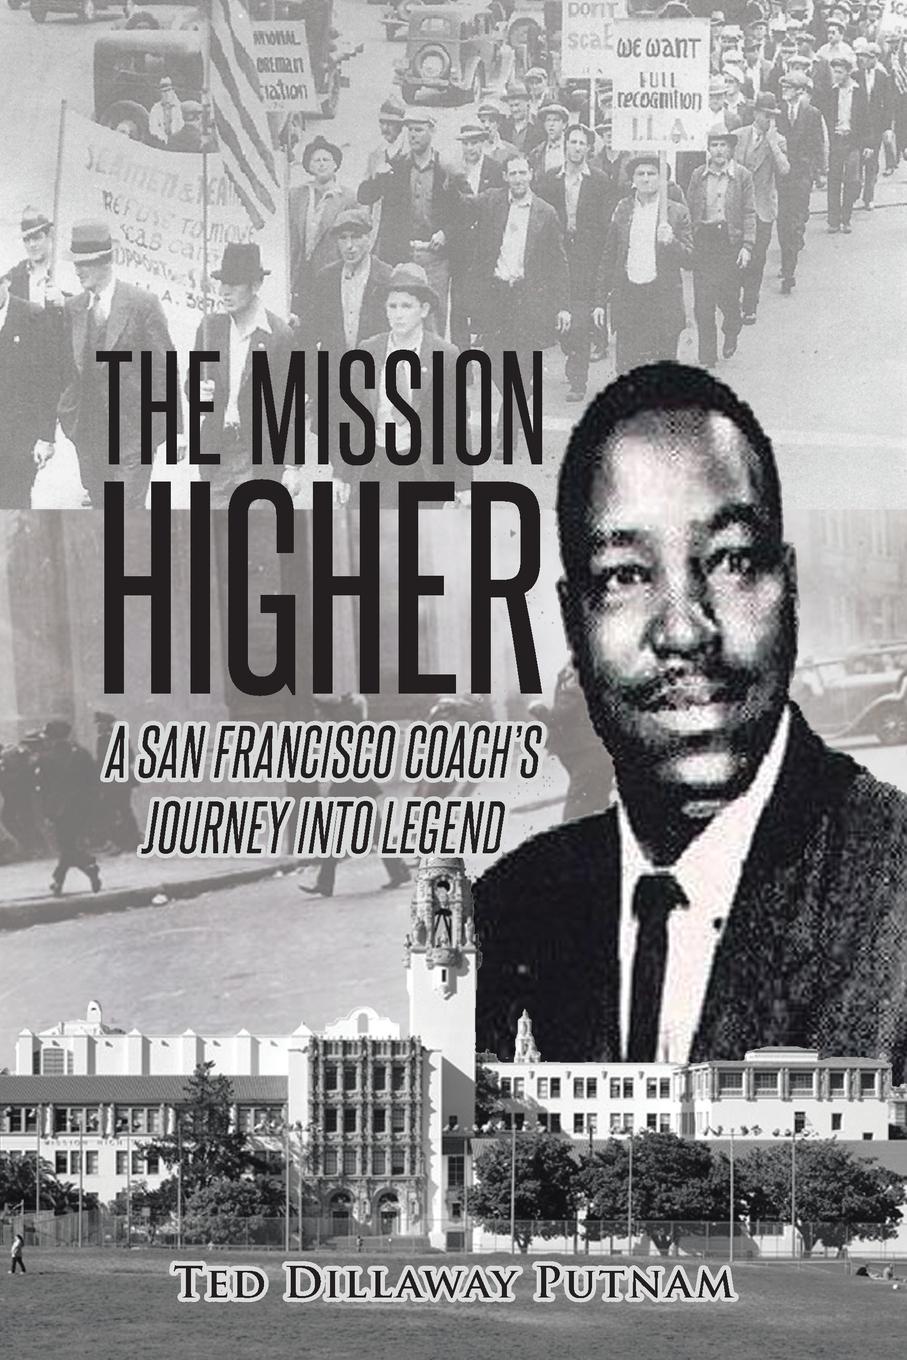 The Mission Higher. A San Francisco Coach.s Journey Into Legend